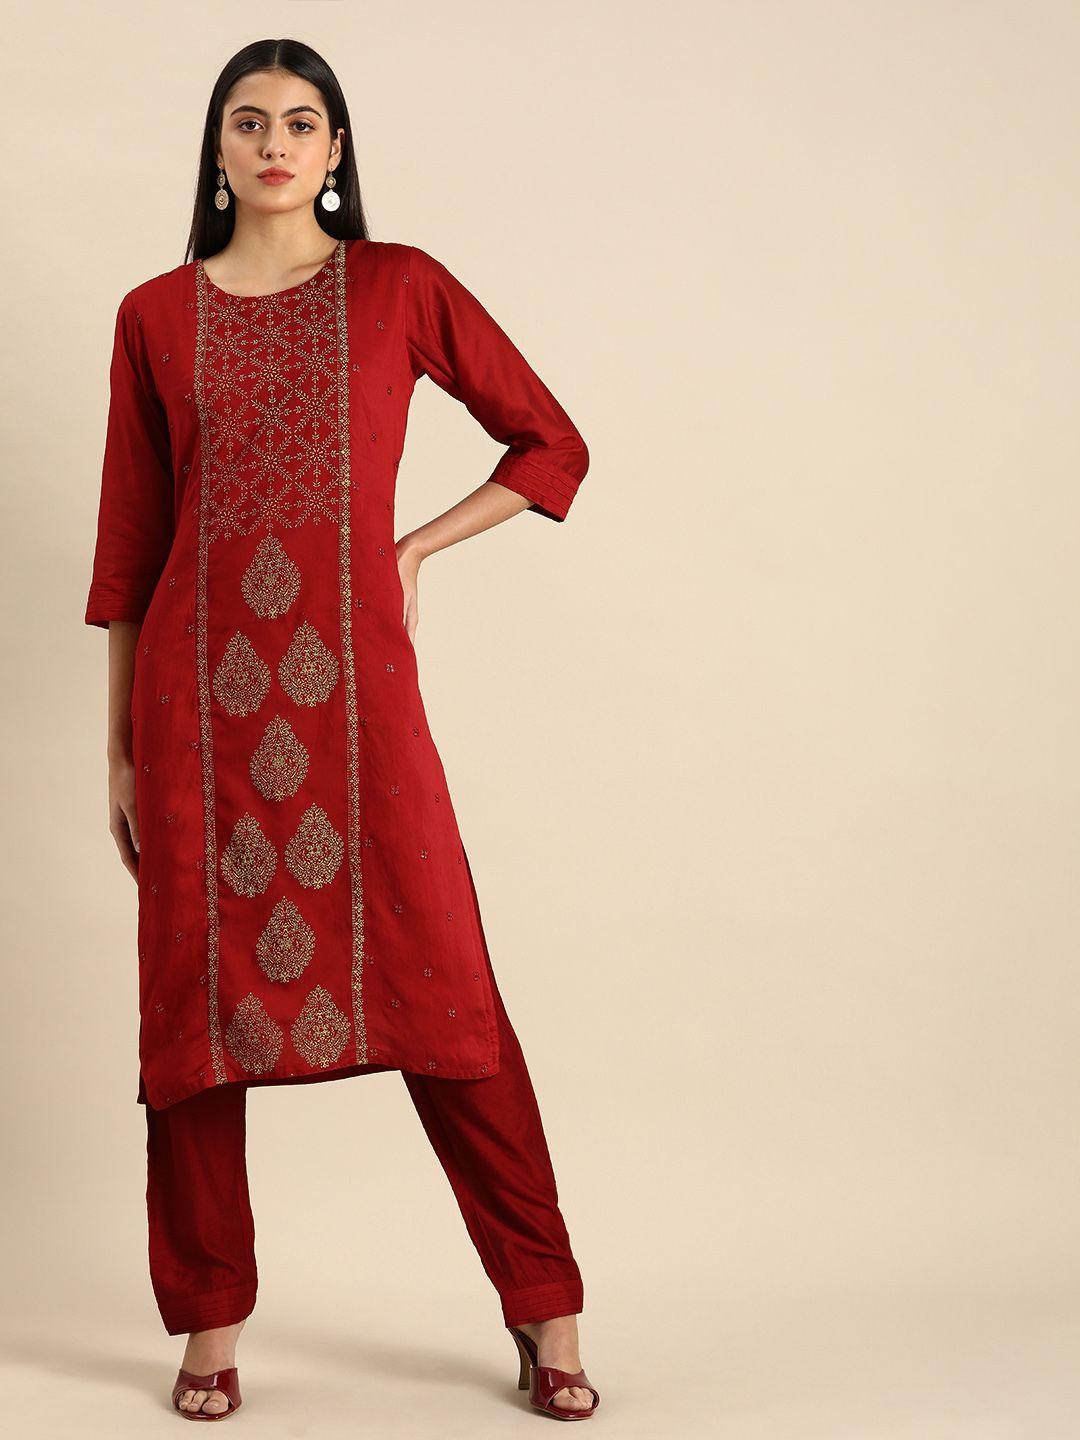 all about you women red & golden ethnic motifs embroidered kurta set